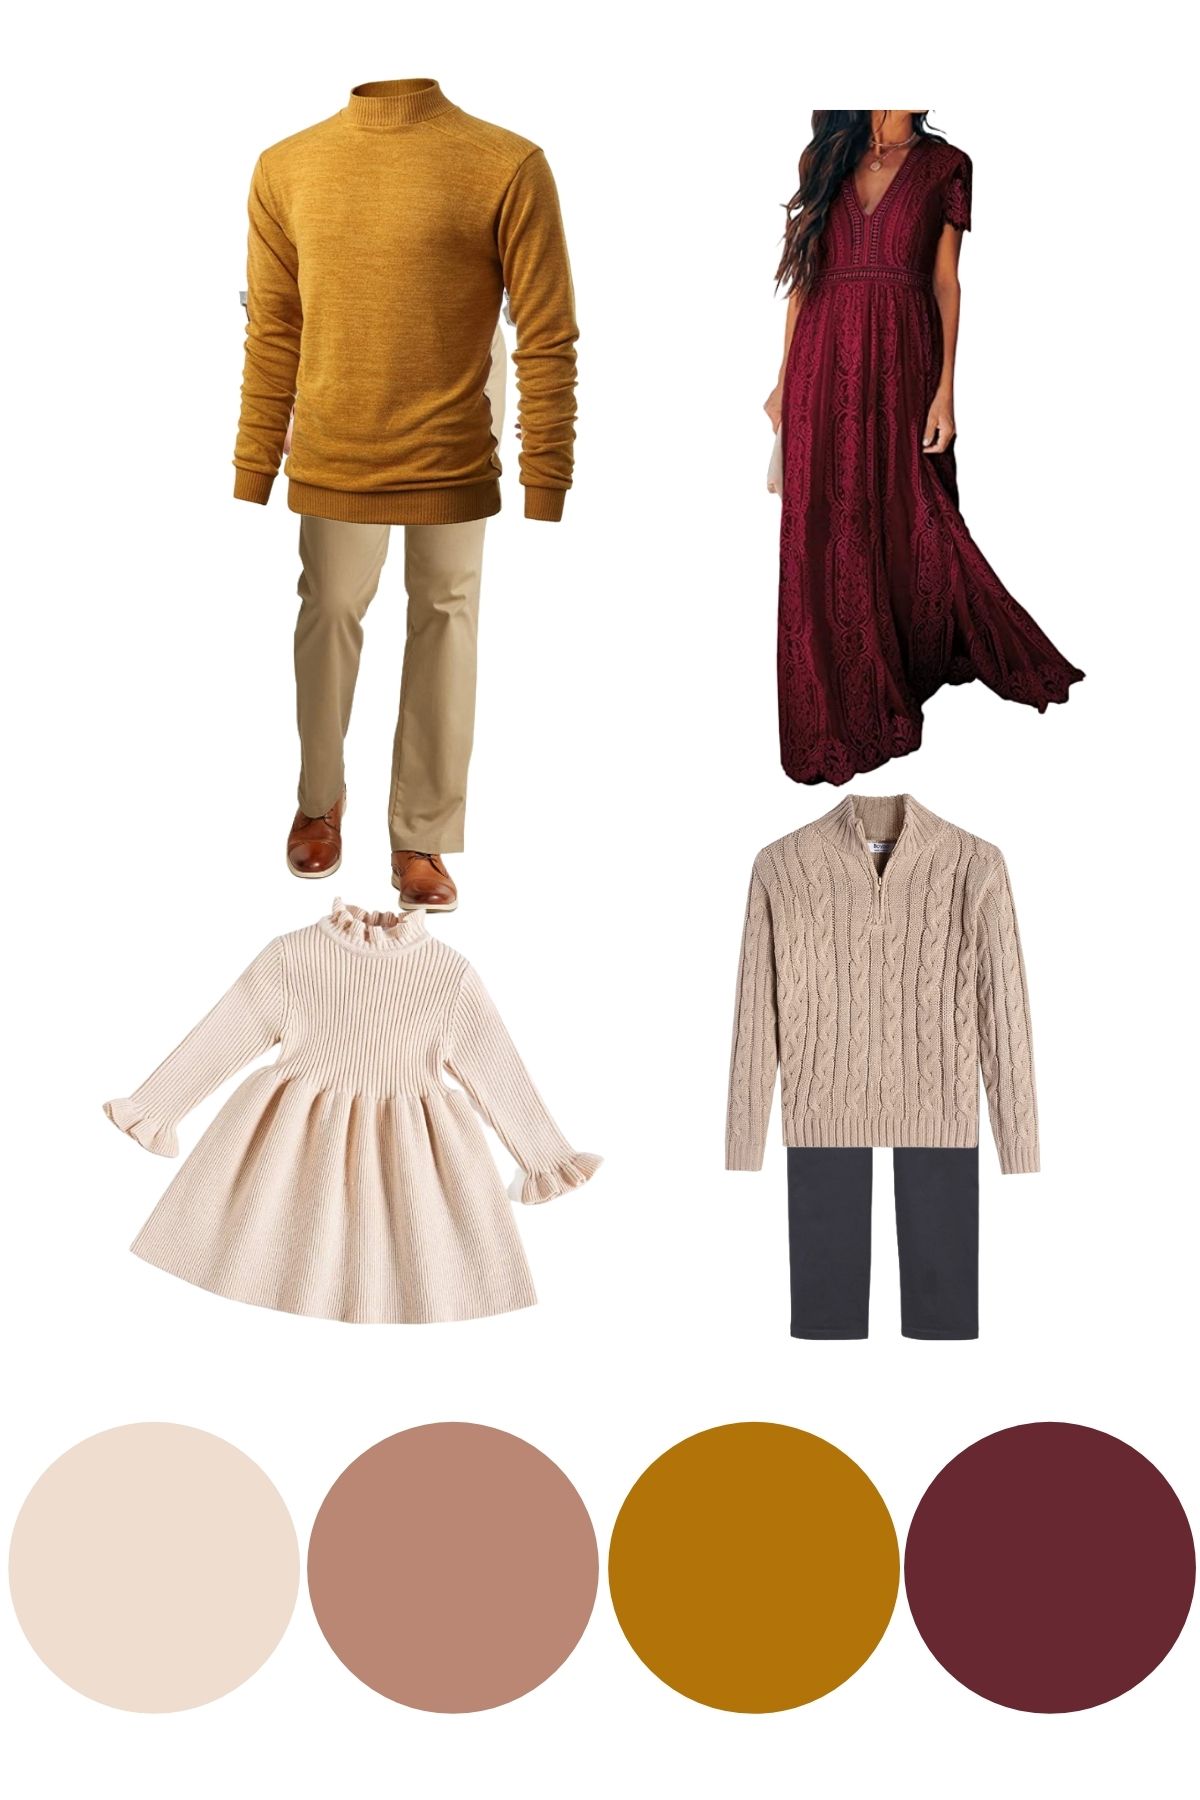 Graphic with burgundy and mustard fall picture outfit ideas and colored circles.